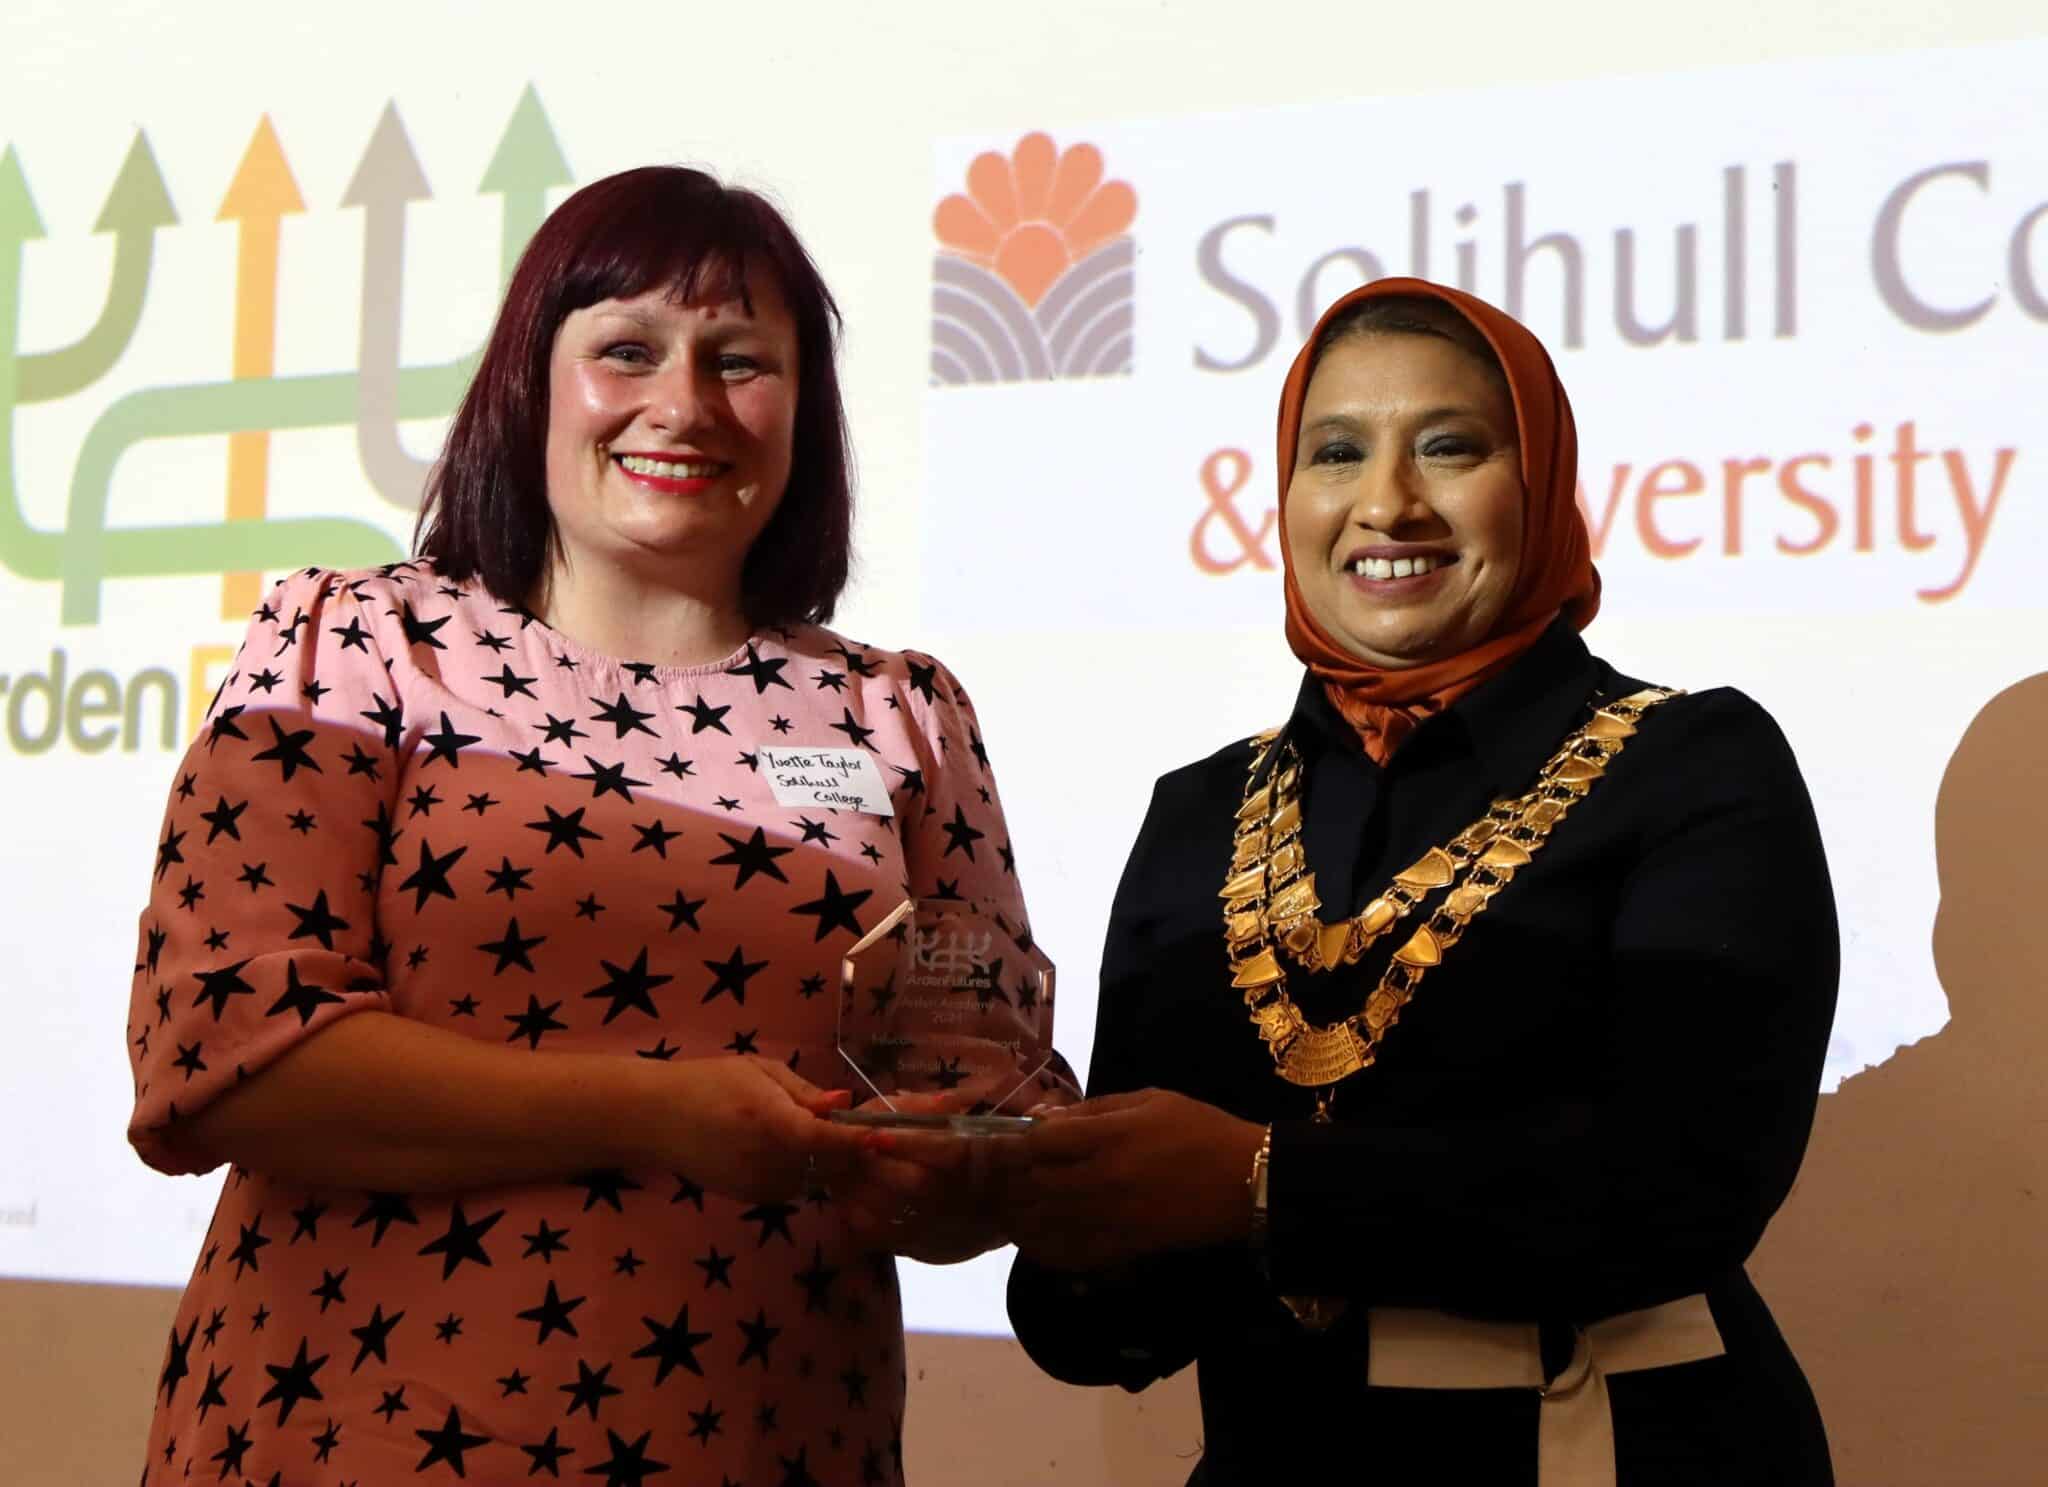 Yvette and the Mayor of Solihull stand in front of powerpoint with award